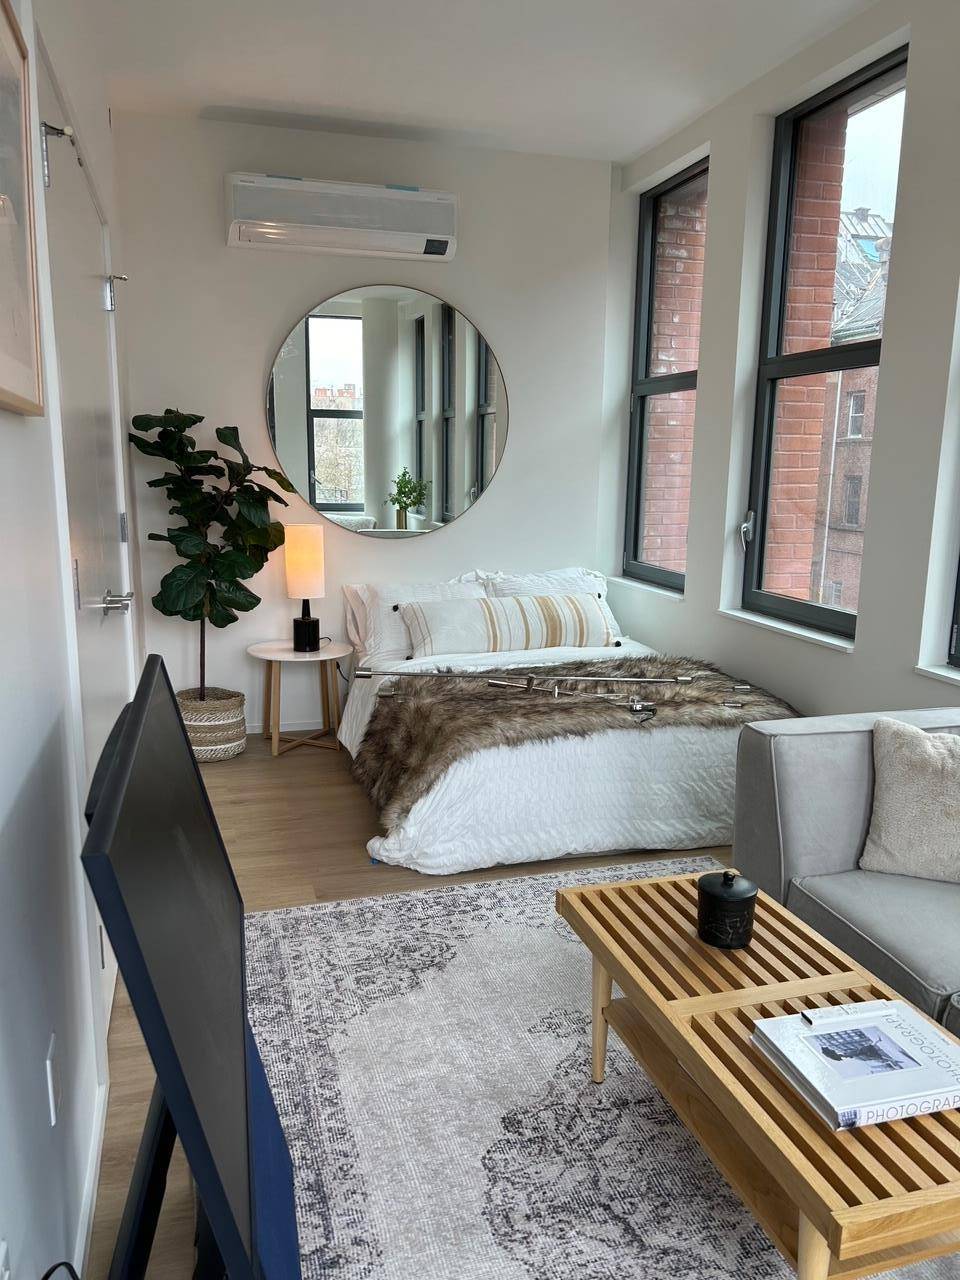 Elevate your lifestyle in this spacious corner studio with double exposure at Mason Gray, where modern luxury meets Brooklyn heritage in one of the most beautiful locations in the borough.